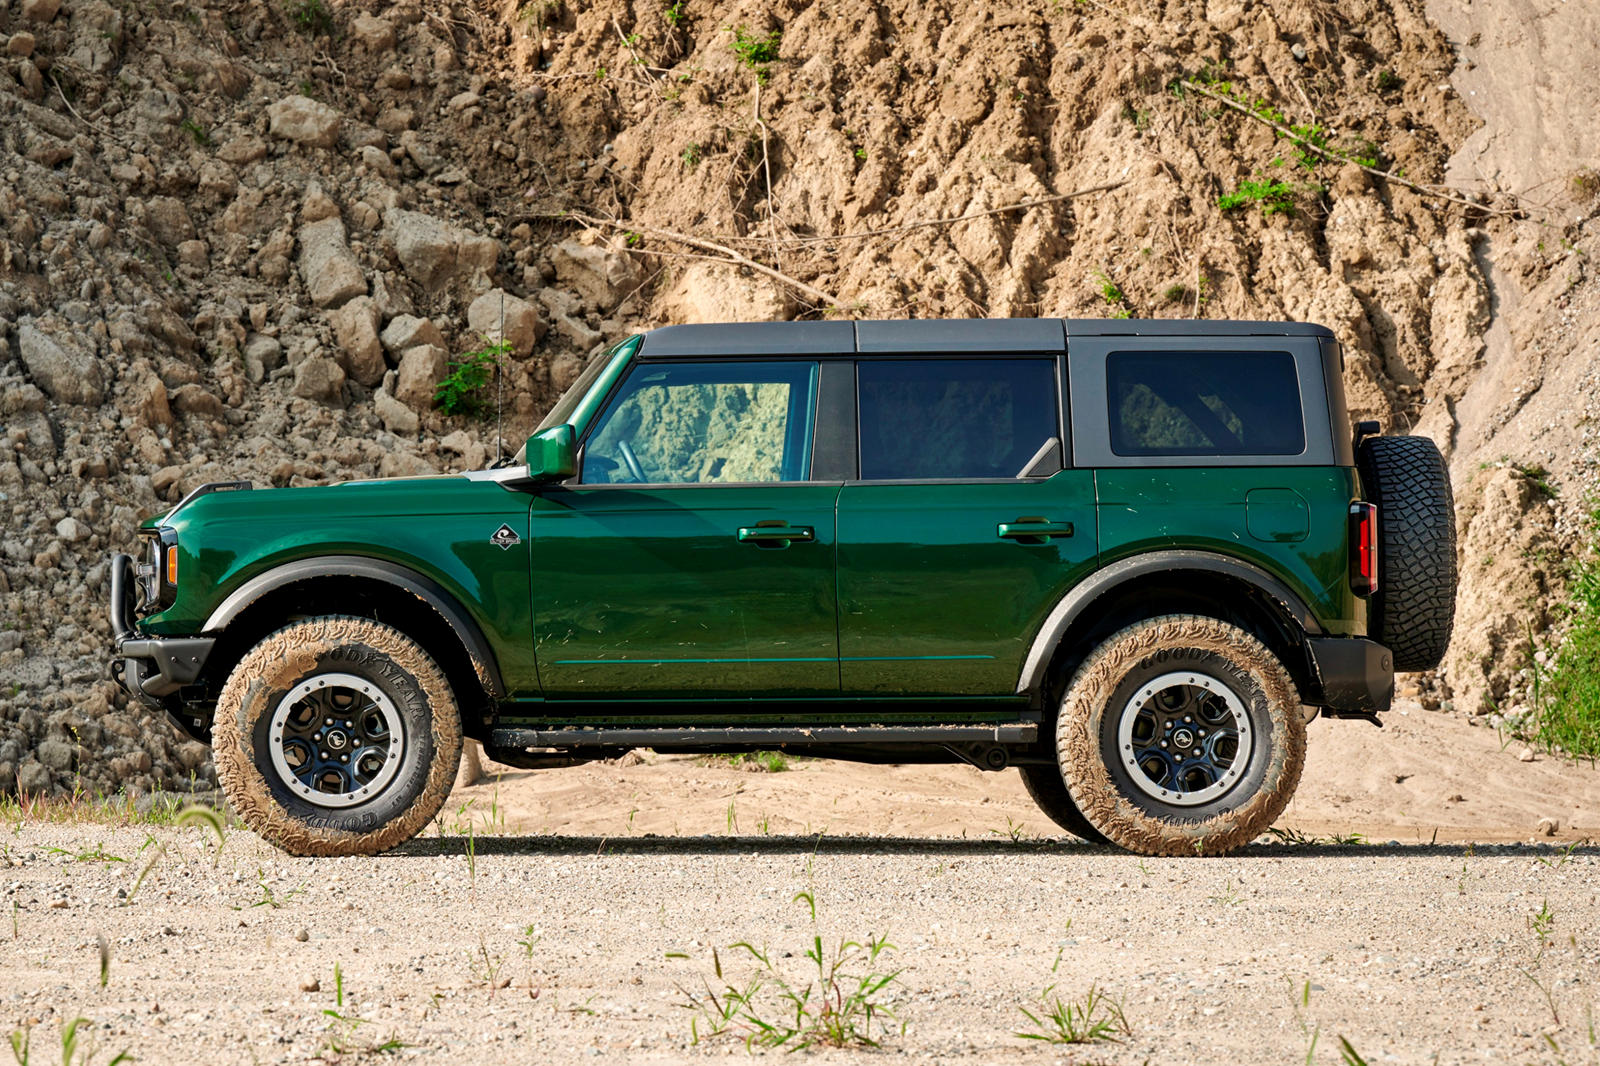 Enthusiasts Demanded These New 2022 Ford Bronco Paint Colors | CarBuzz